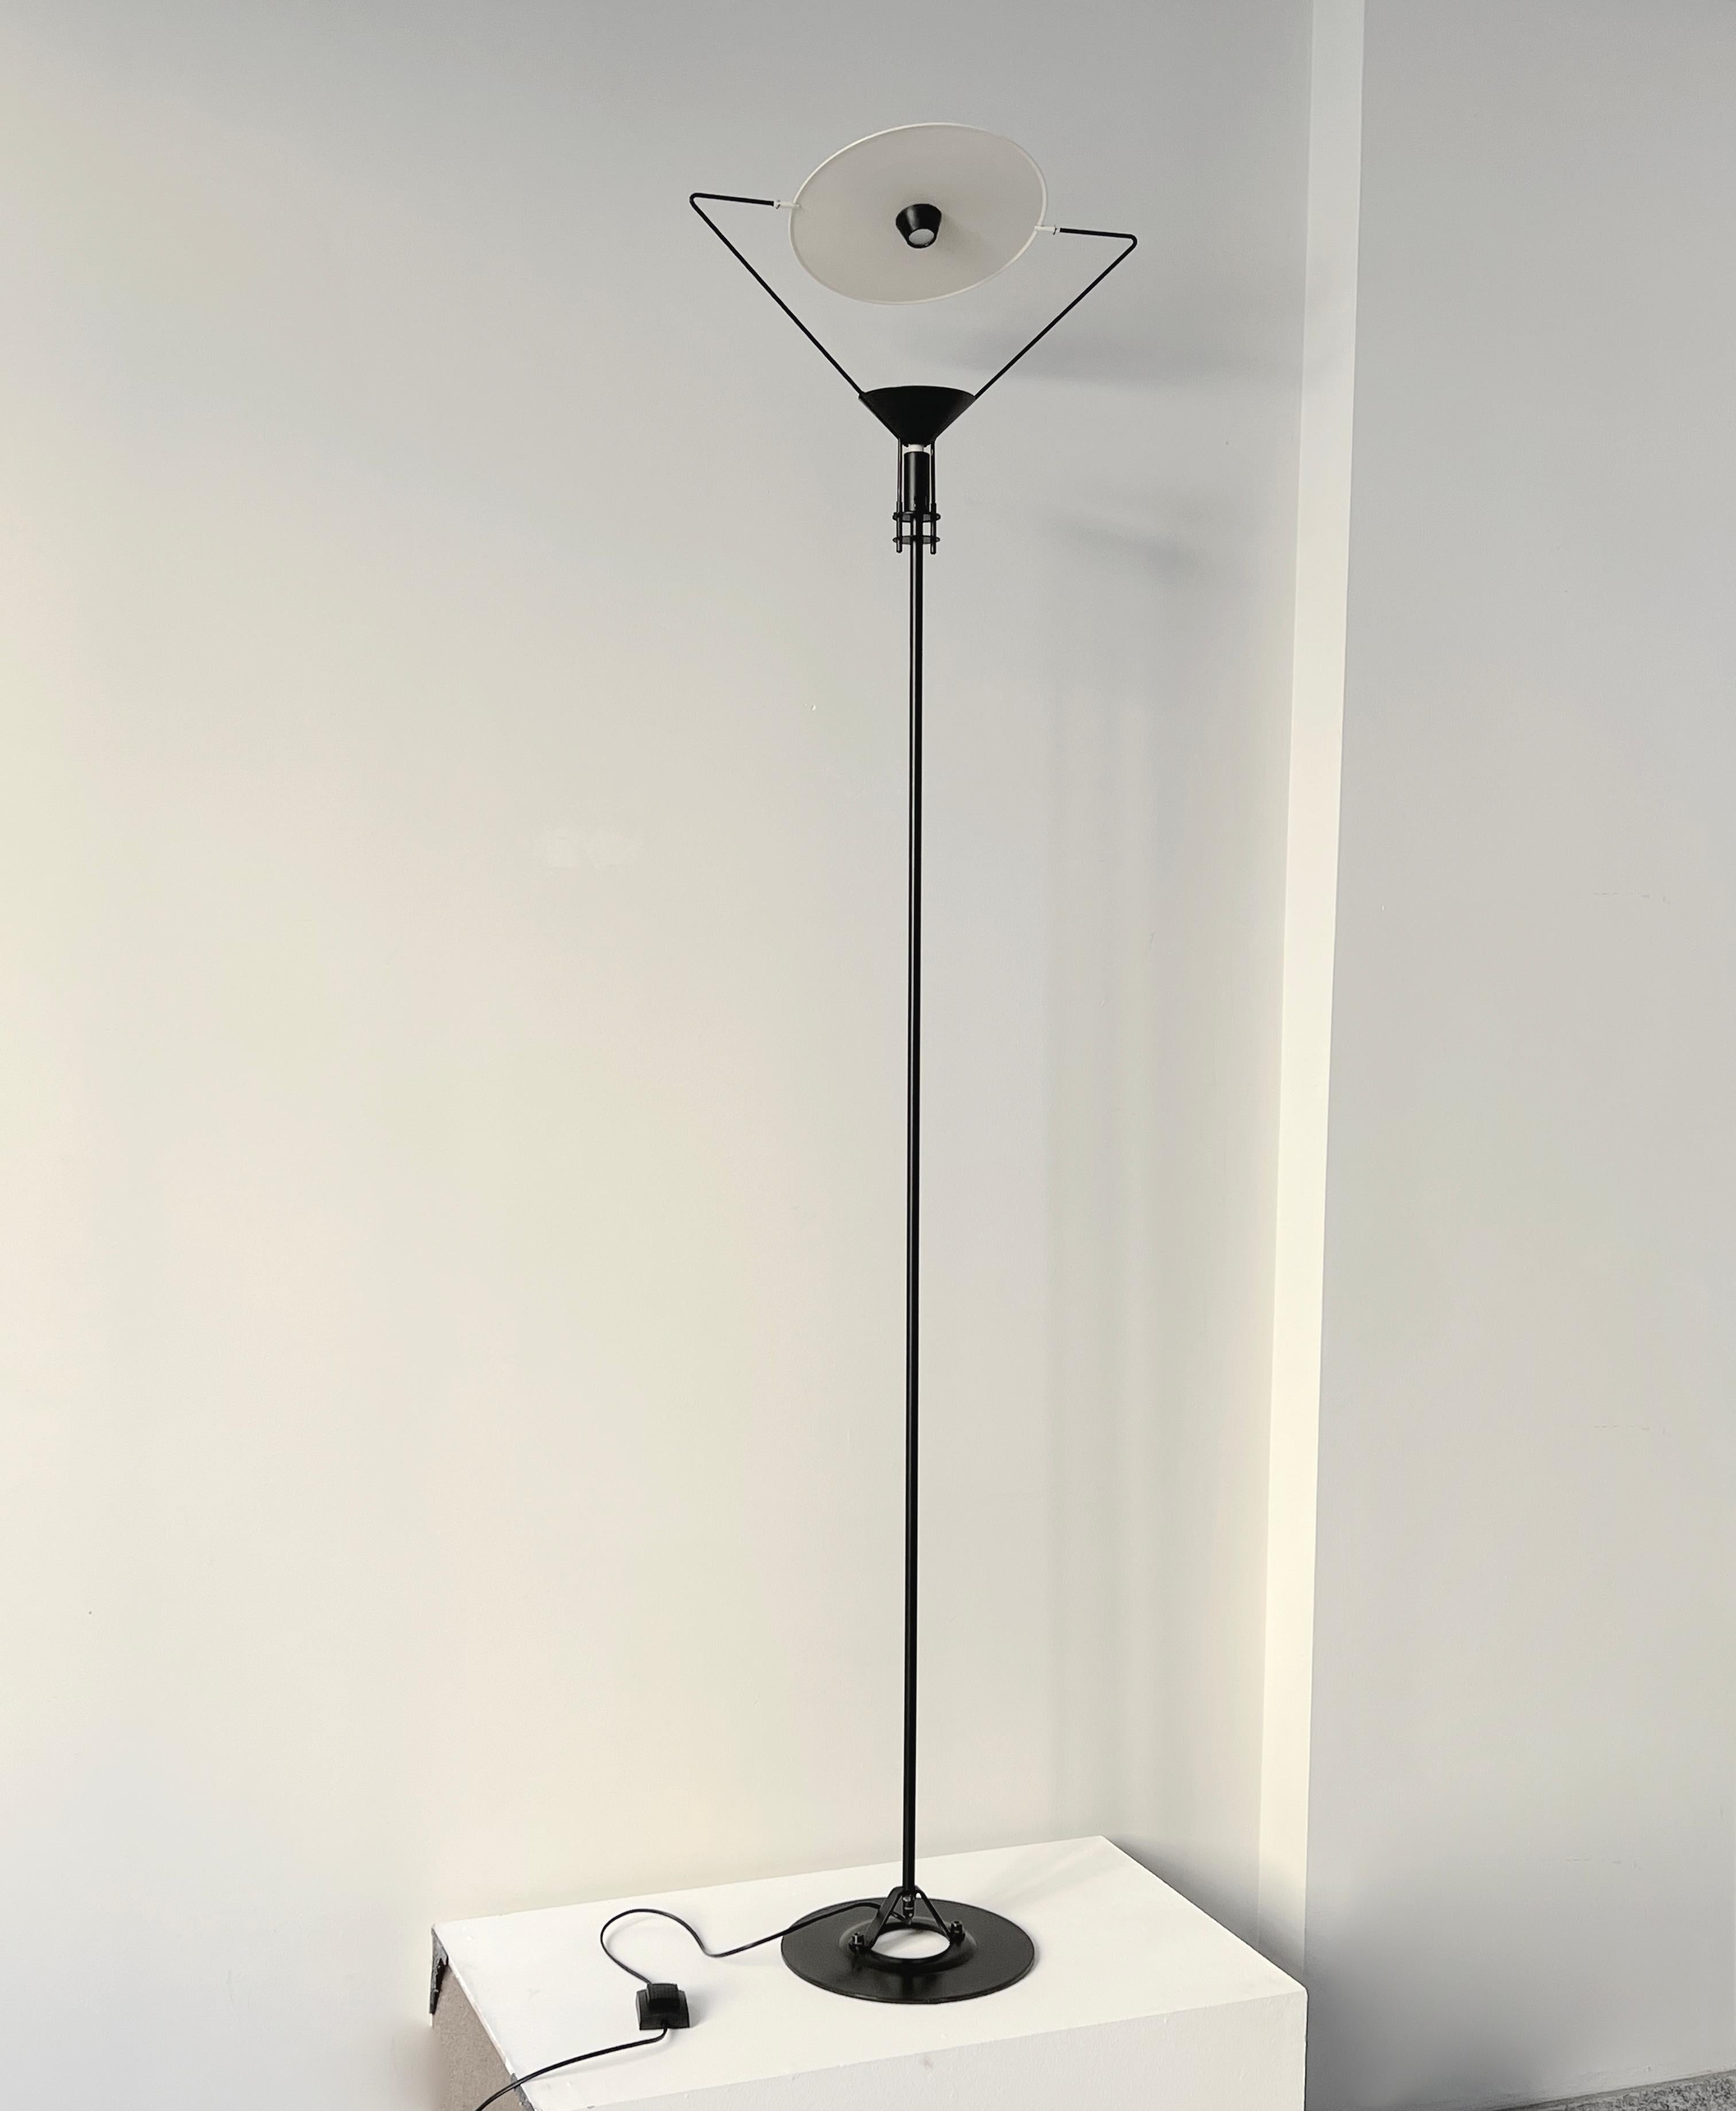 During the 1980s, Artemide produced an Italian postmodern floor lamp crafted by the renowned designer Carlo Forcolino. This lamp features a sleek black lacquered metal body and a strikingly sculptural round diffuser. Notably, the lens is elegantly